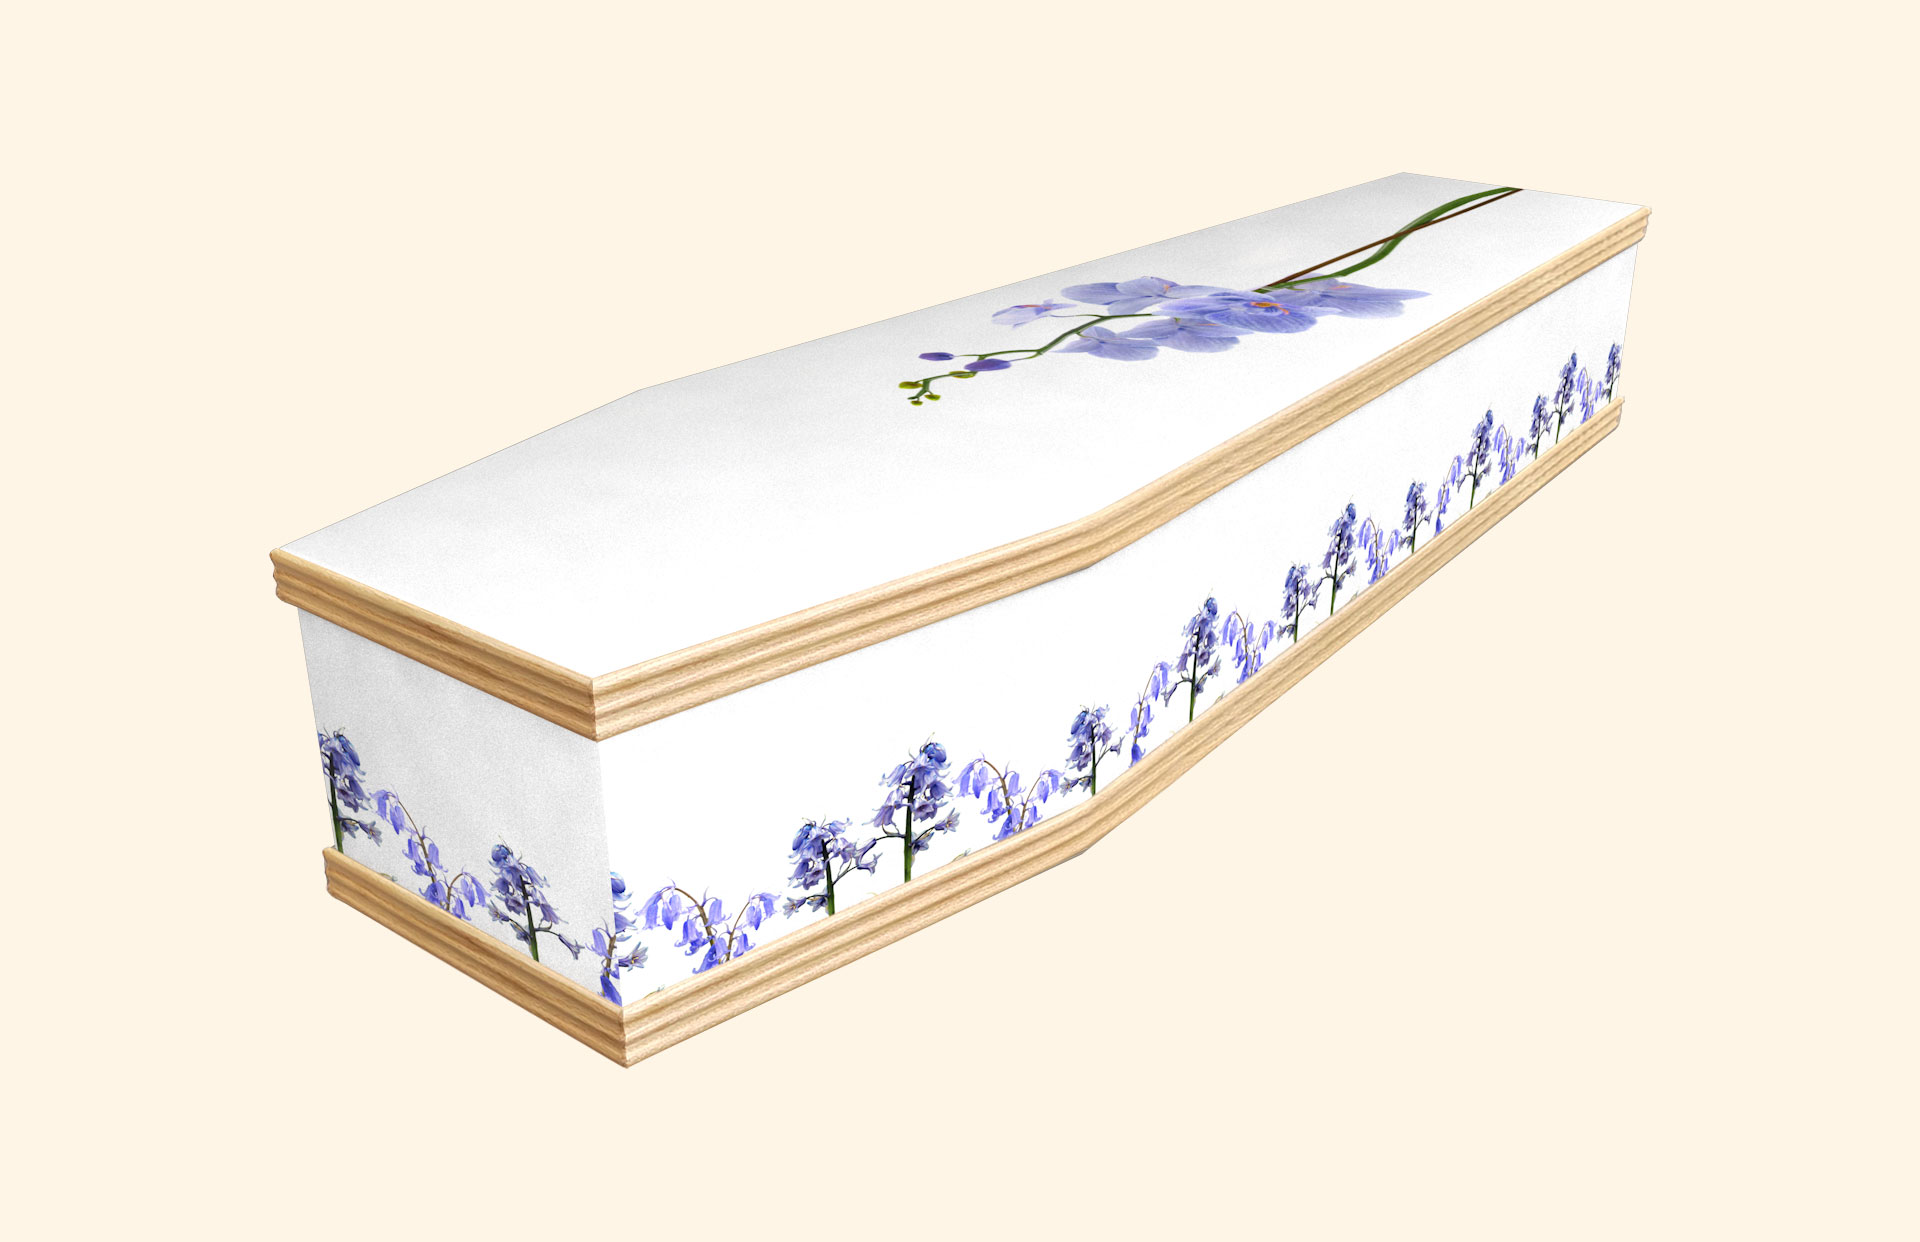 Bluebell and Orchid design on a classic coffin